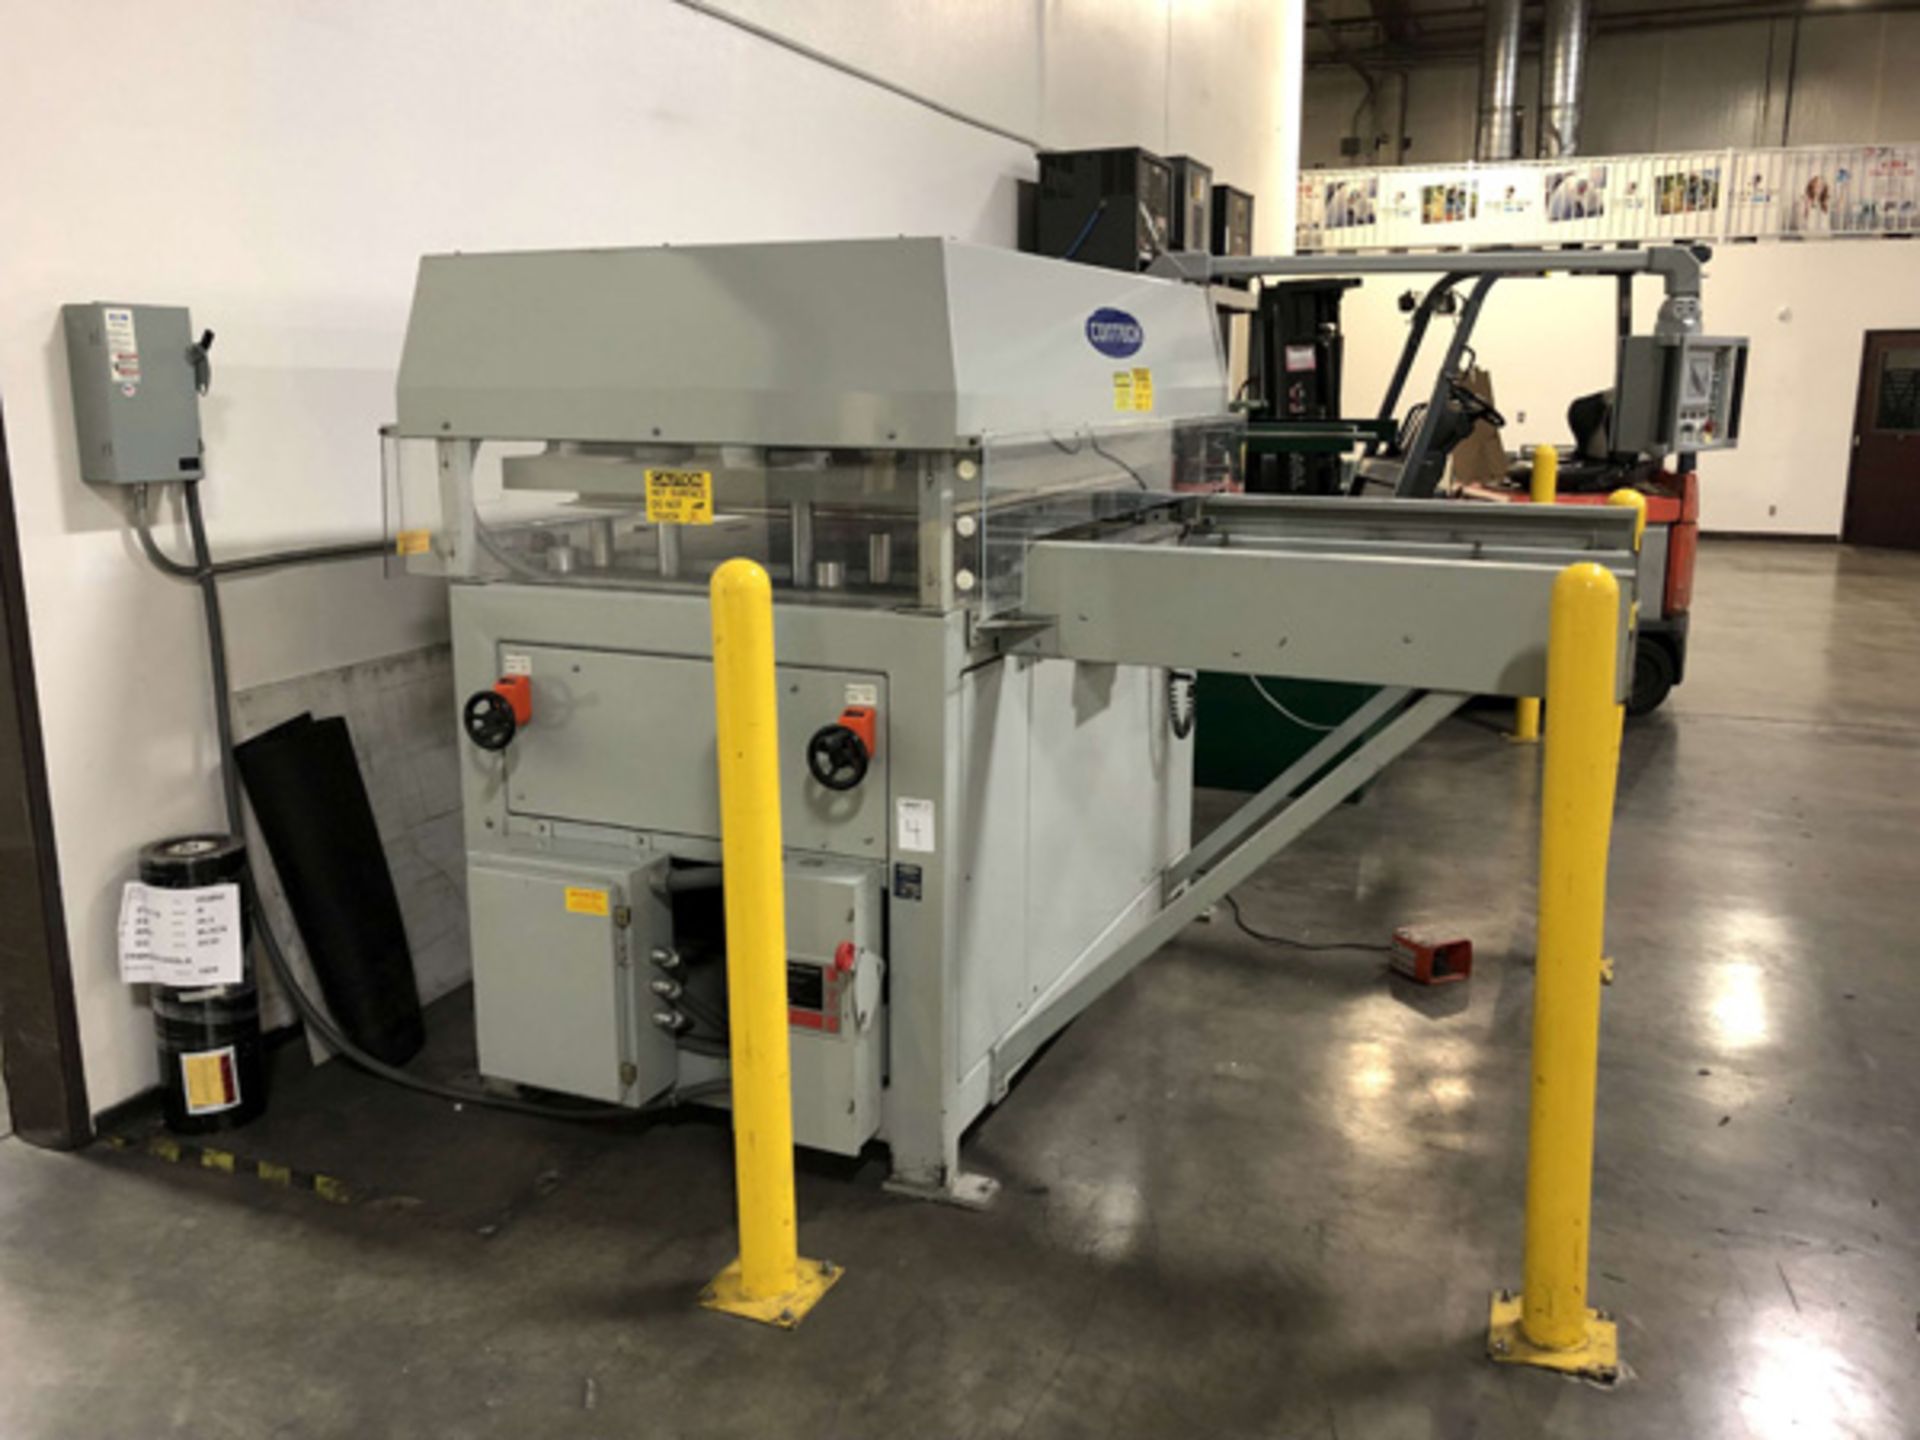 Contech 36" x 48" Ultra Press, Heated Platen: 48" L to R, 36" F to B, Touchscreen PLC Control, - Image 6 of 13